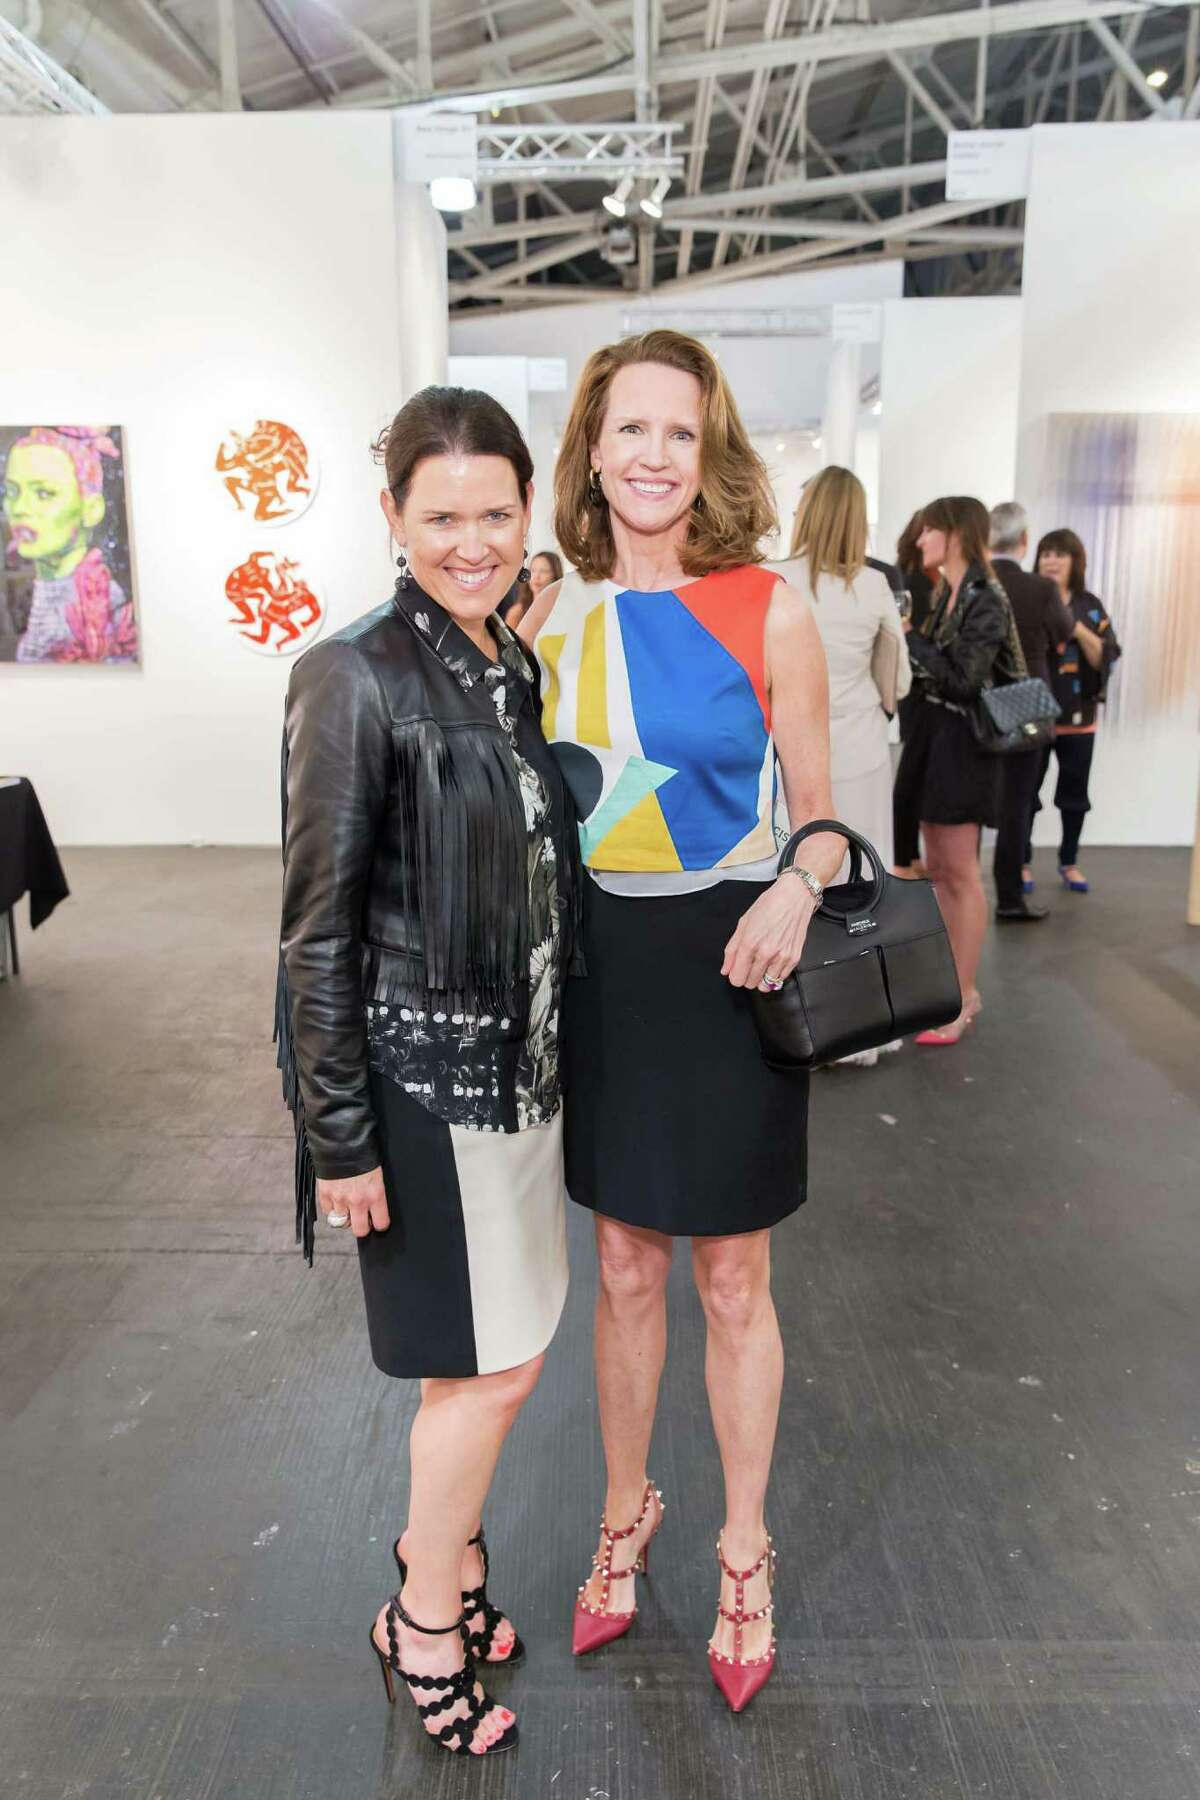 Kendall Wilkinson and Barbara Vaughn Hoimes at the Art Market San Francisco Benefit Preview Reception on April 29, 2015.